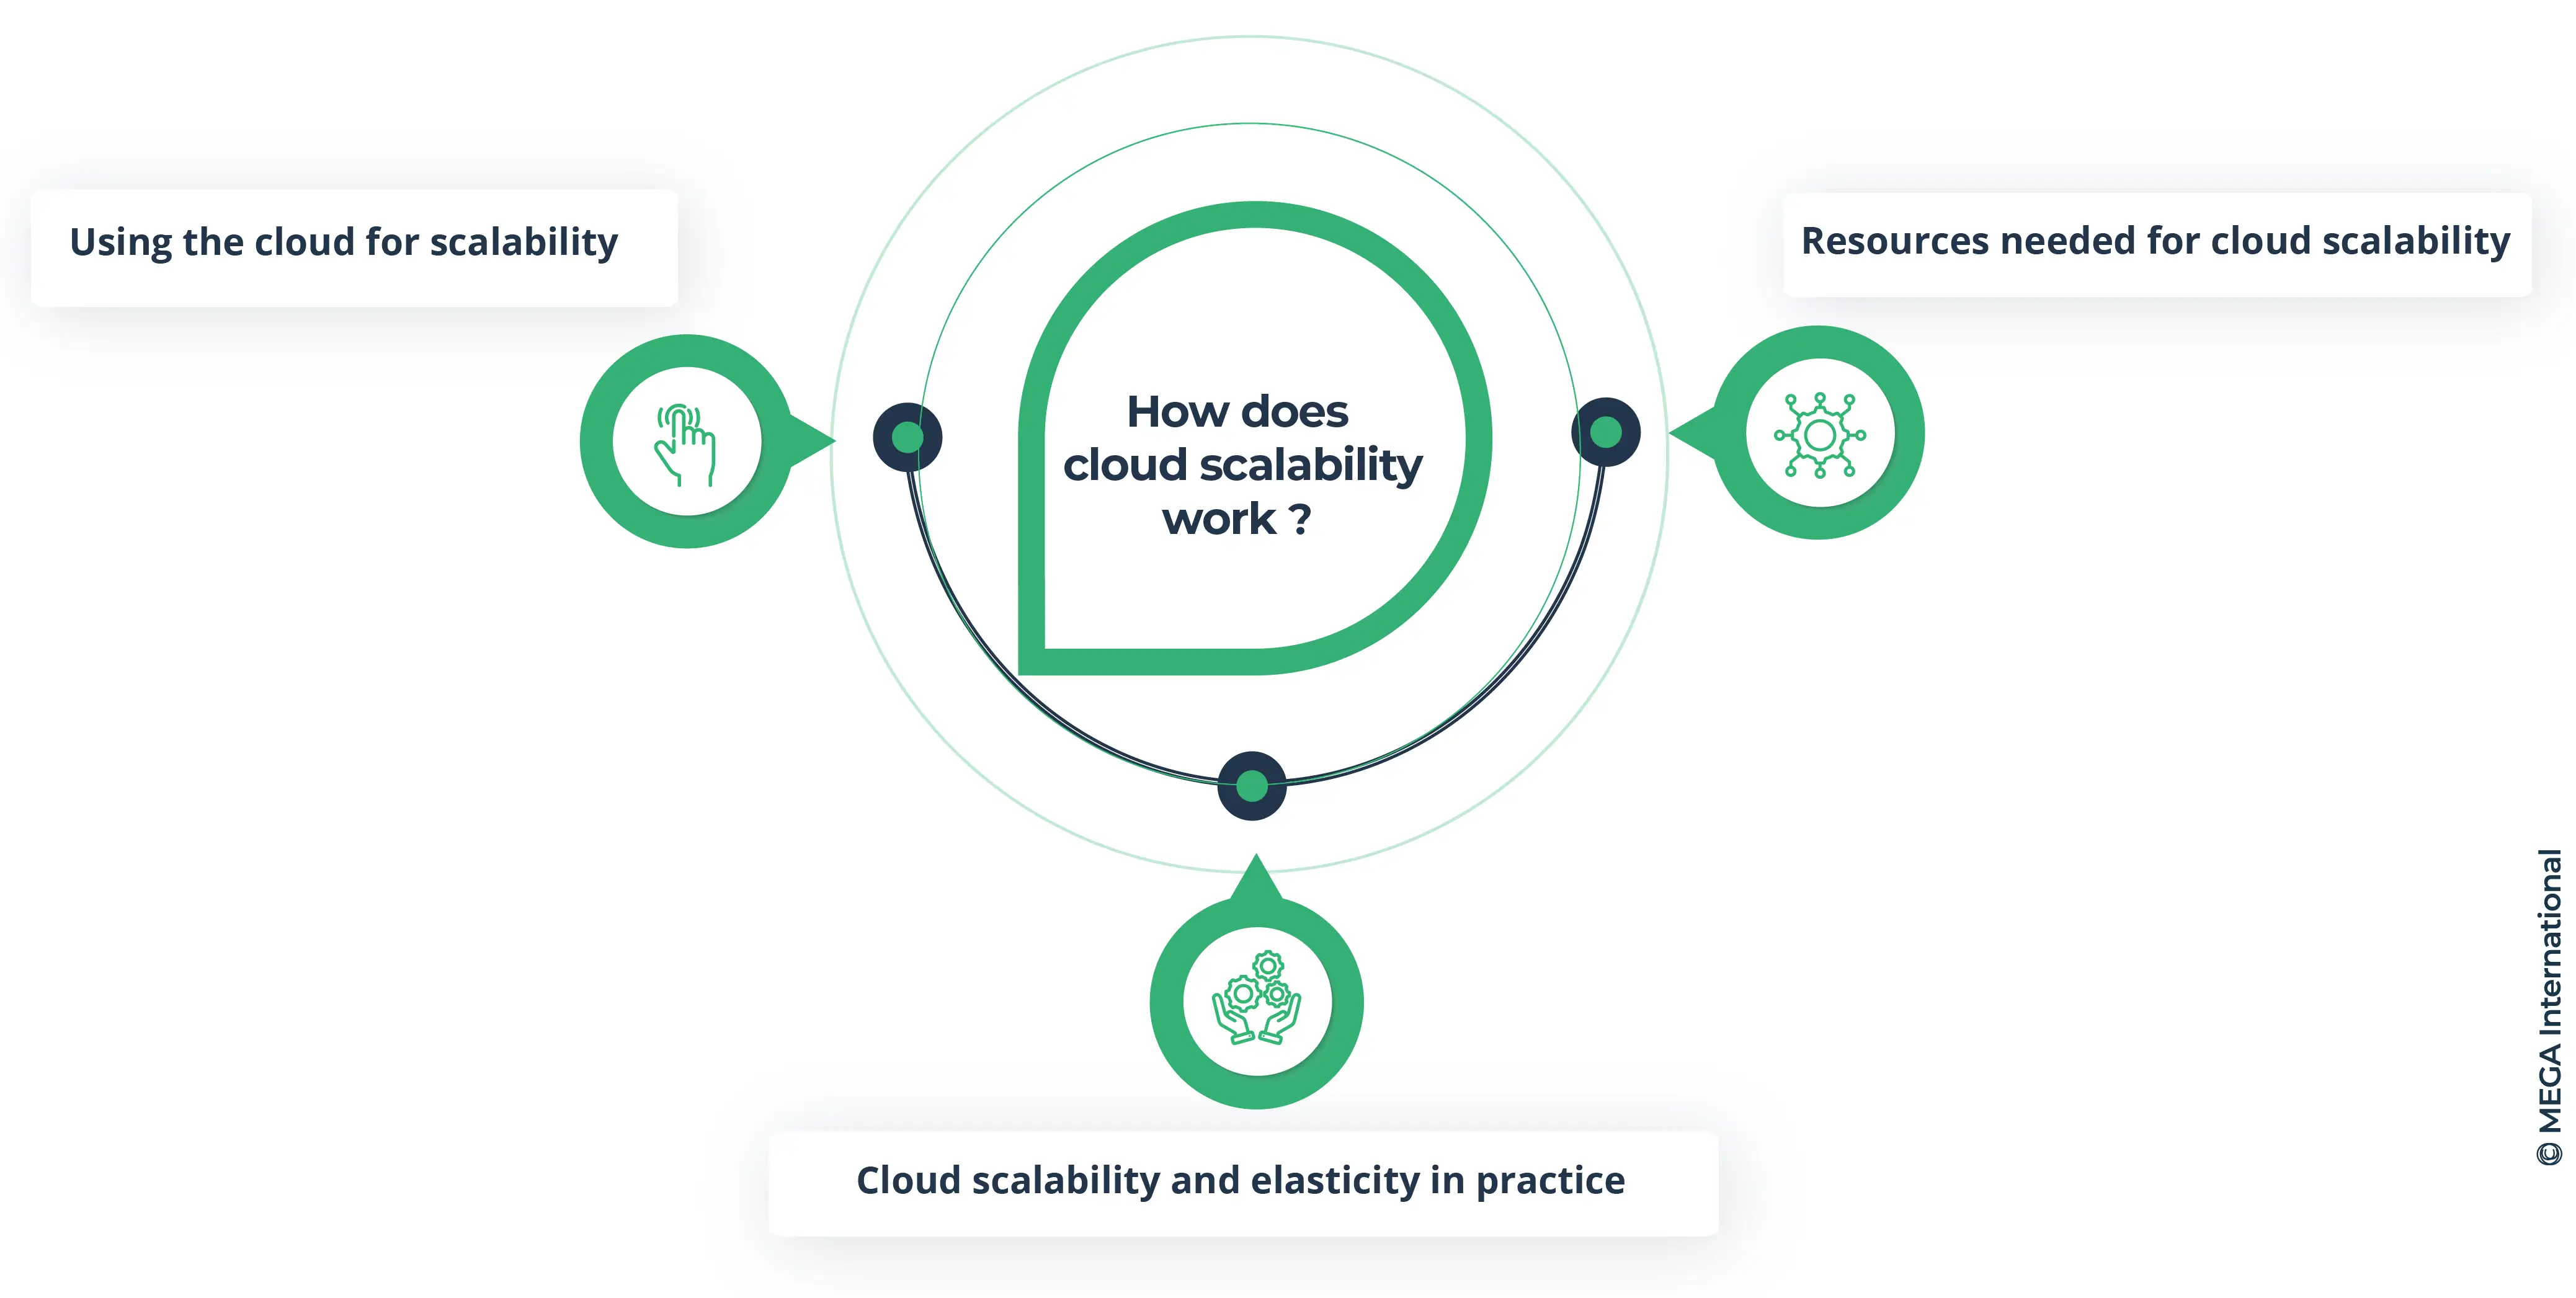 How does cloud scalability work?